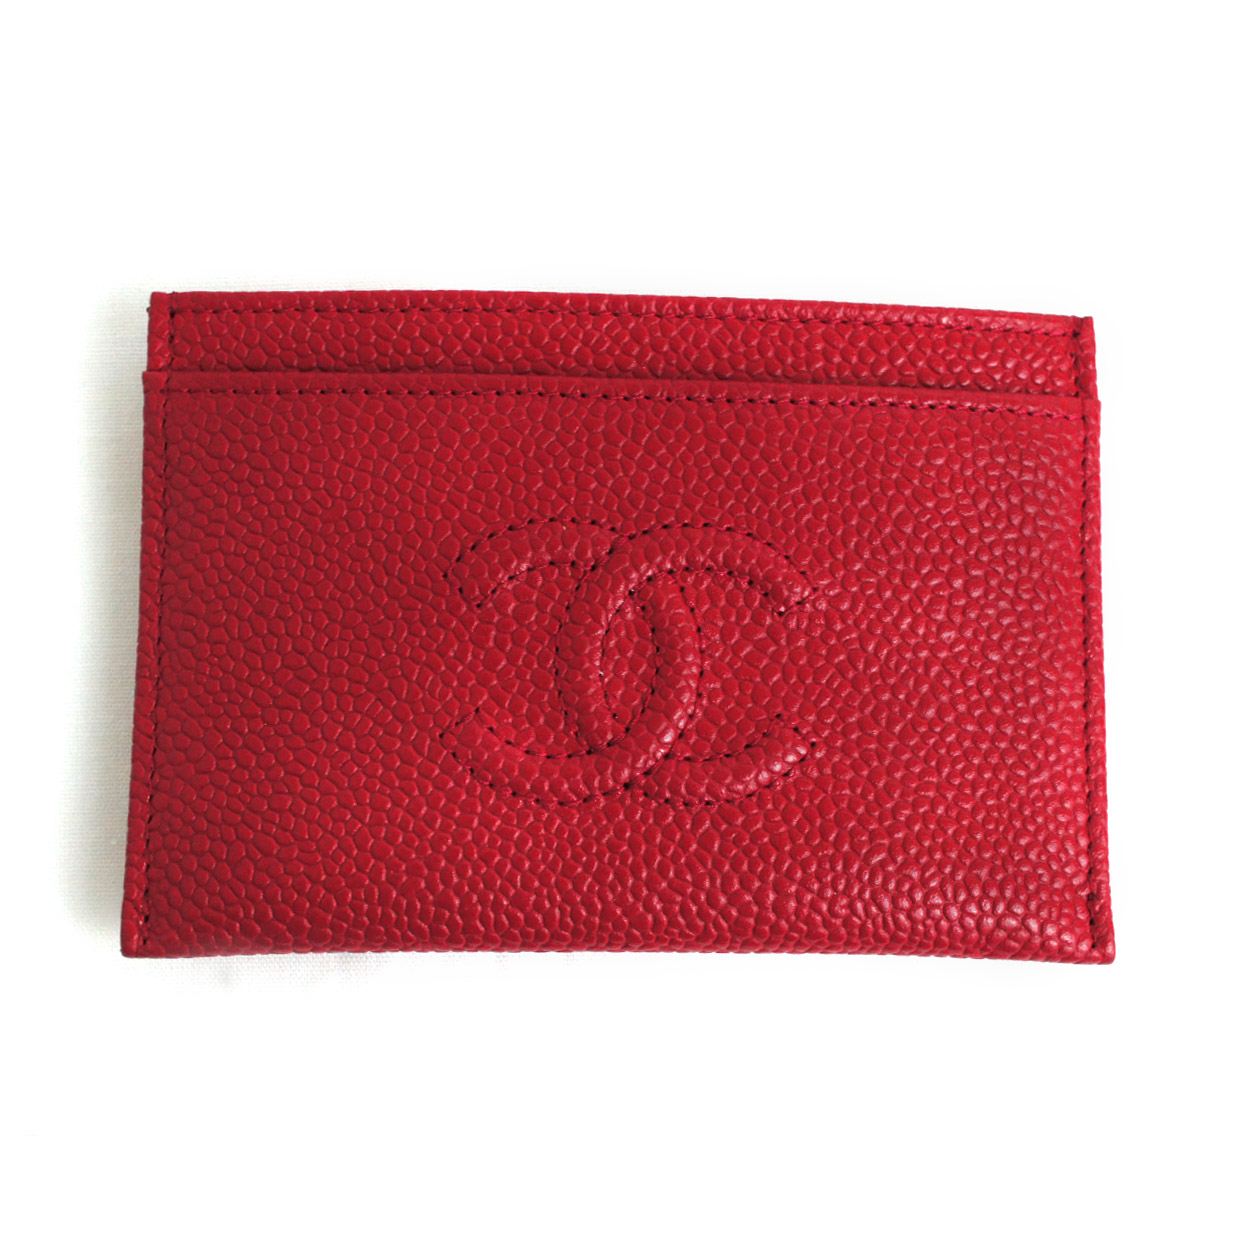 Women's :: Wallets and Coin Cases :: Card Cases :: CHANEL credit card holder  red Caviar skin Leather CC embossed